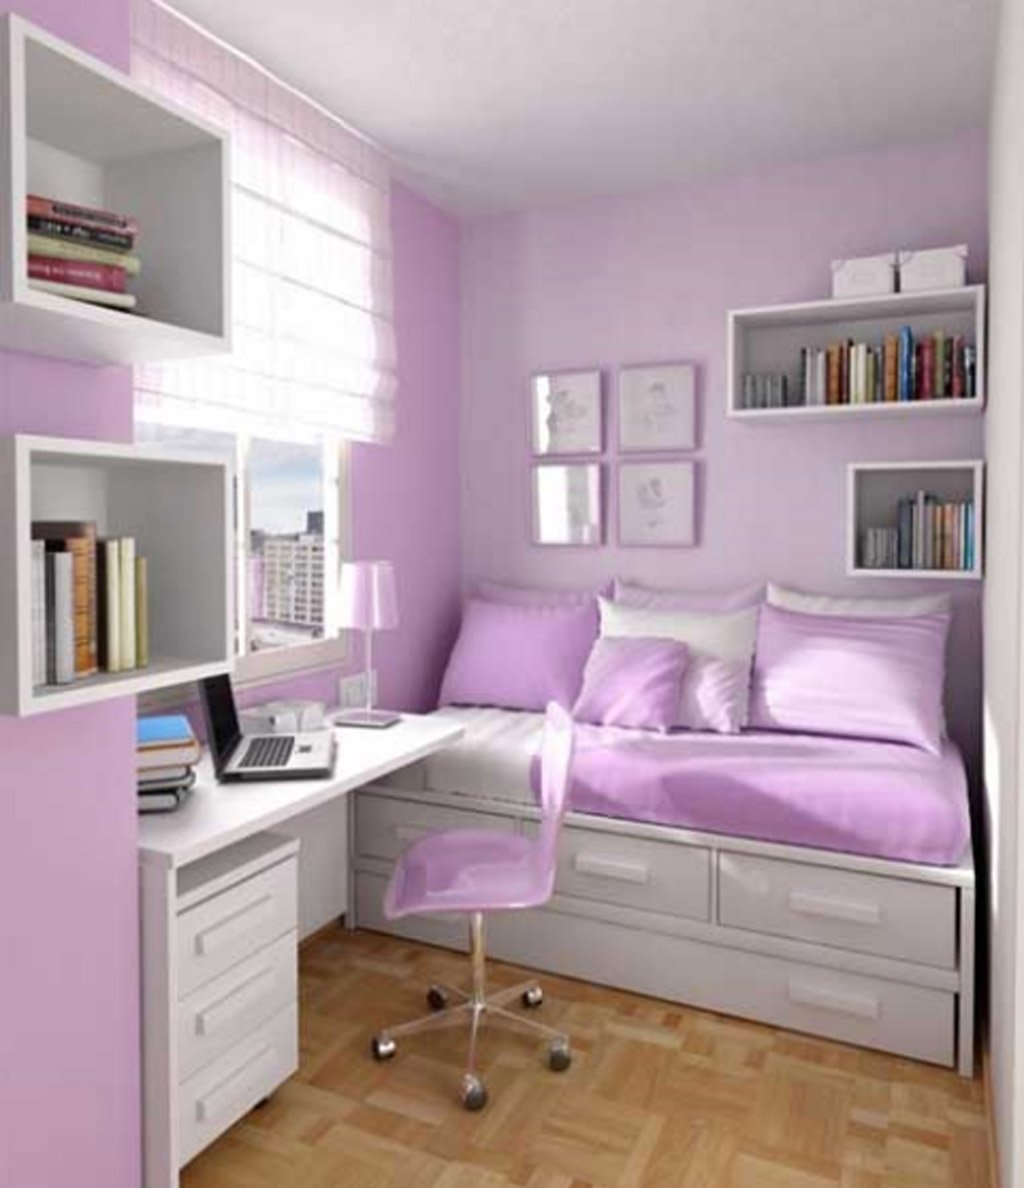 10 Most Recommended Small Bedroom Ideas For Teenage Girls small bedroom ideas for teenage girls home improvement ideas 2022